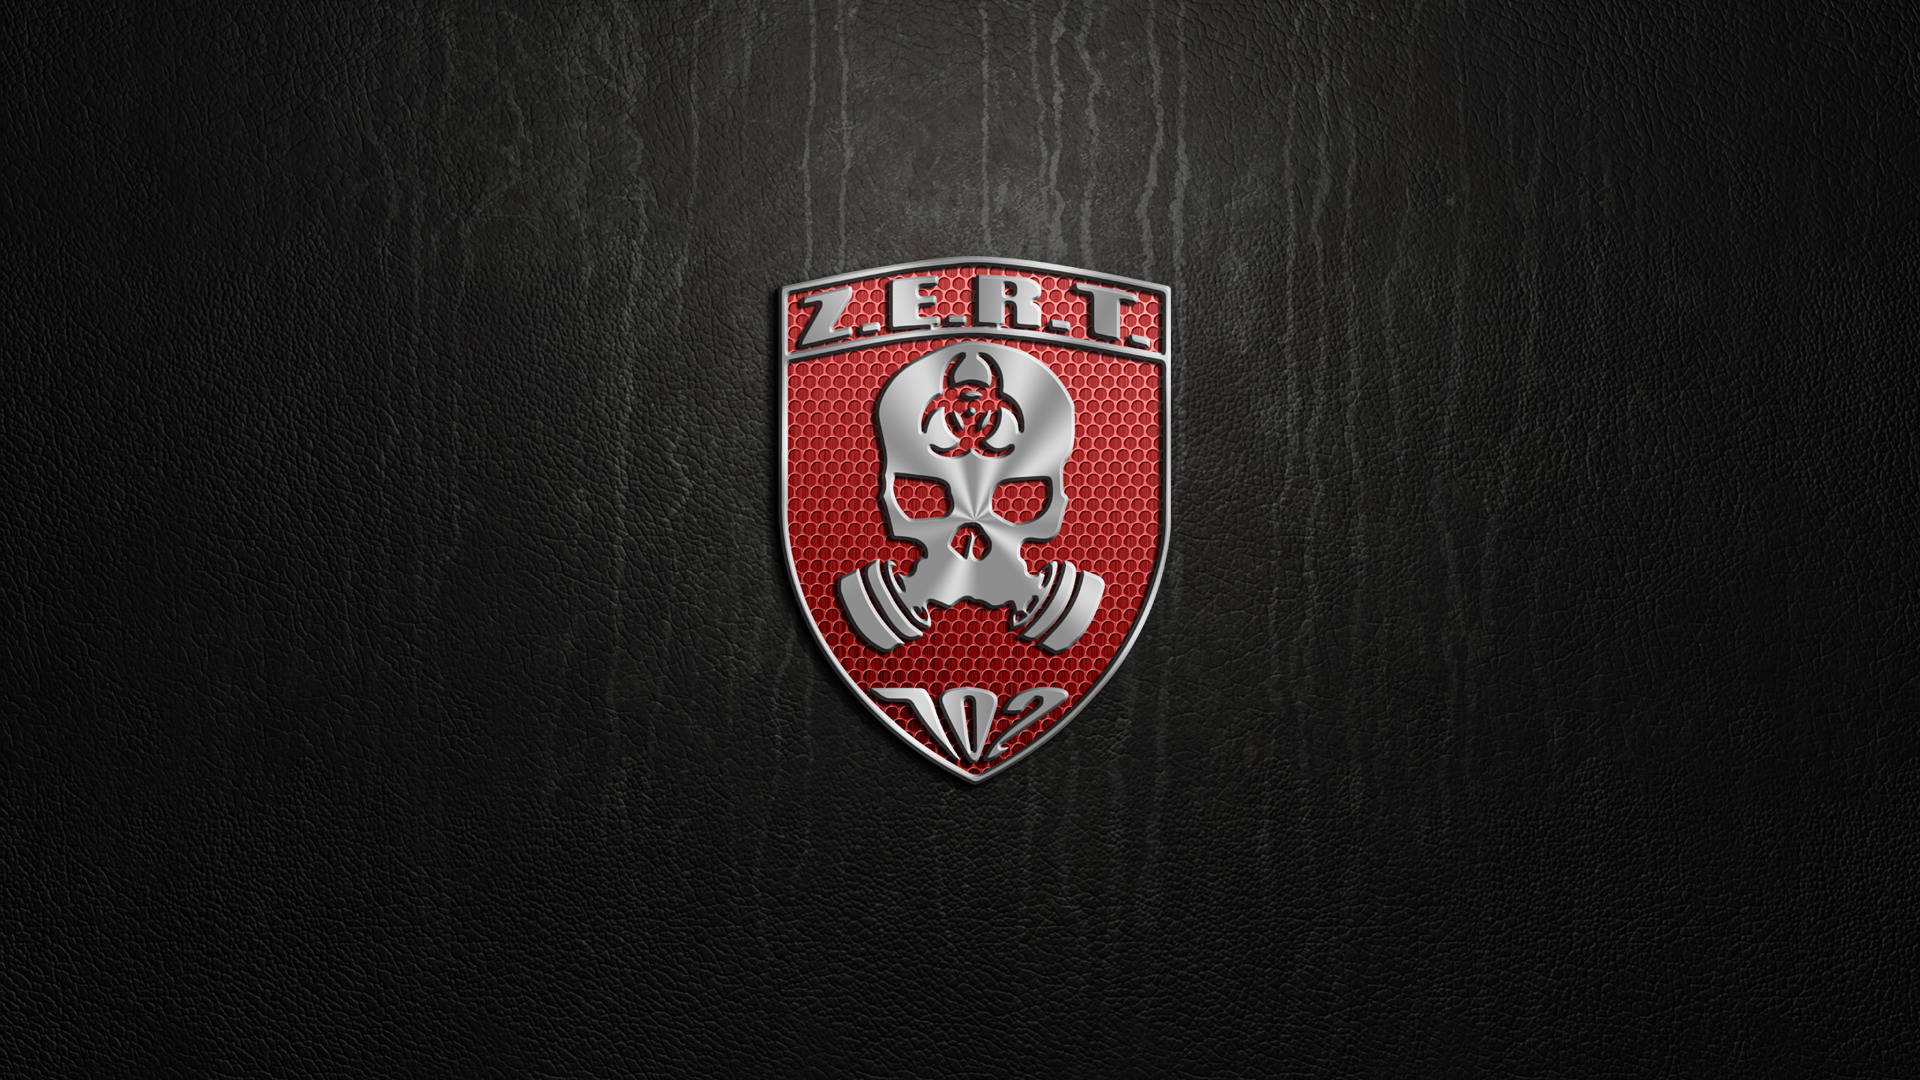 Z.E.R.T. Wallpapers